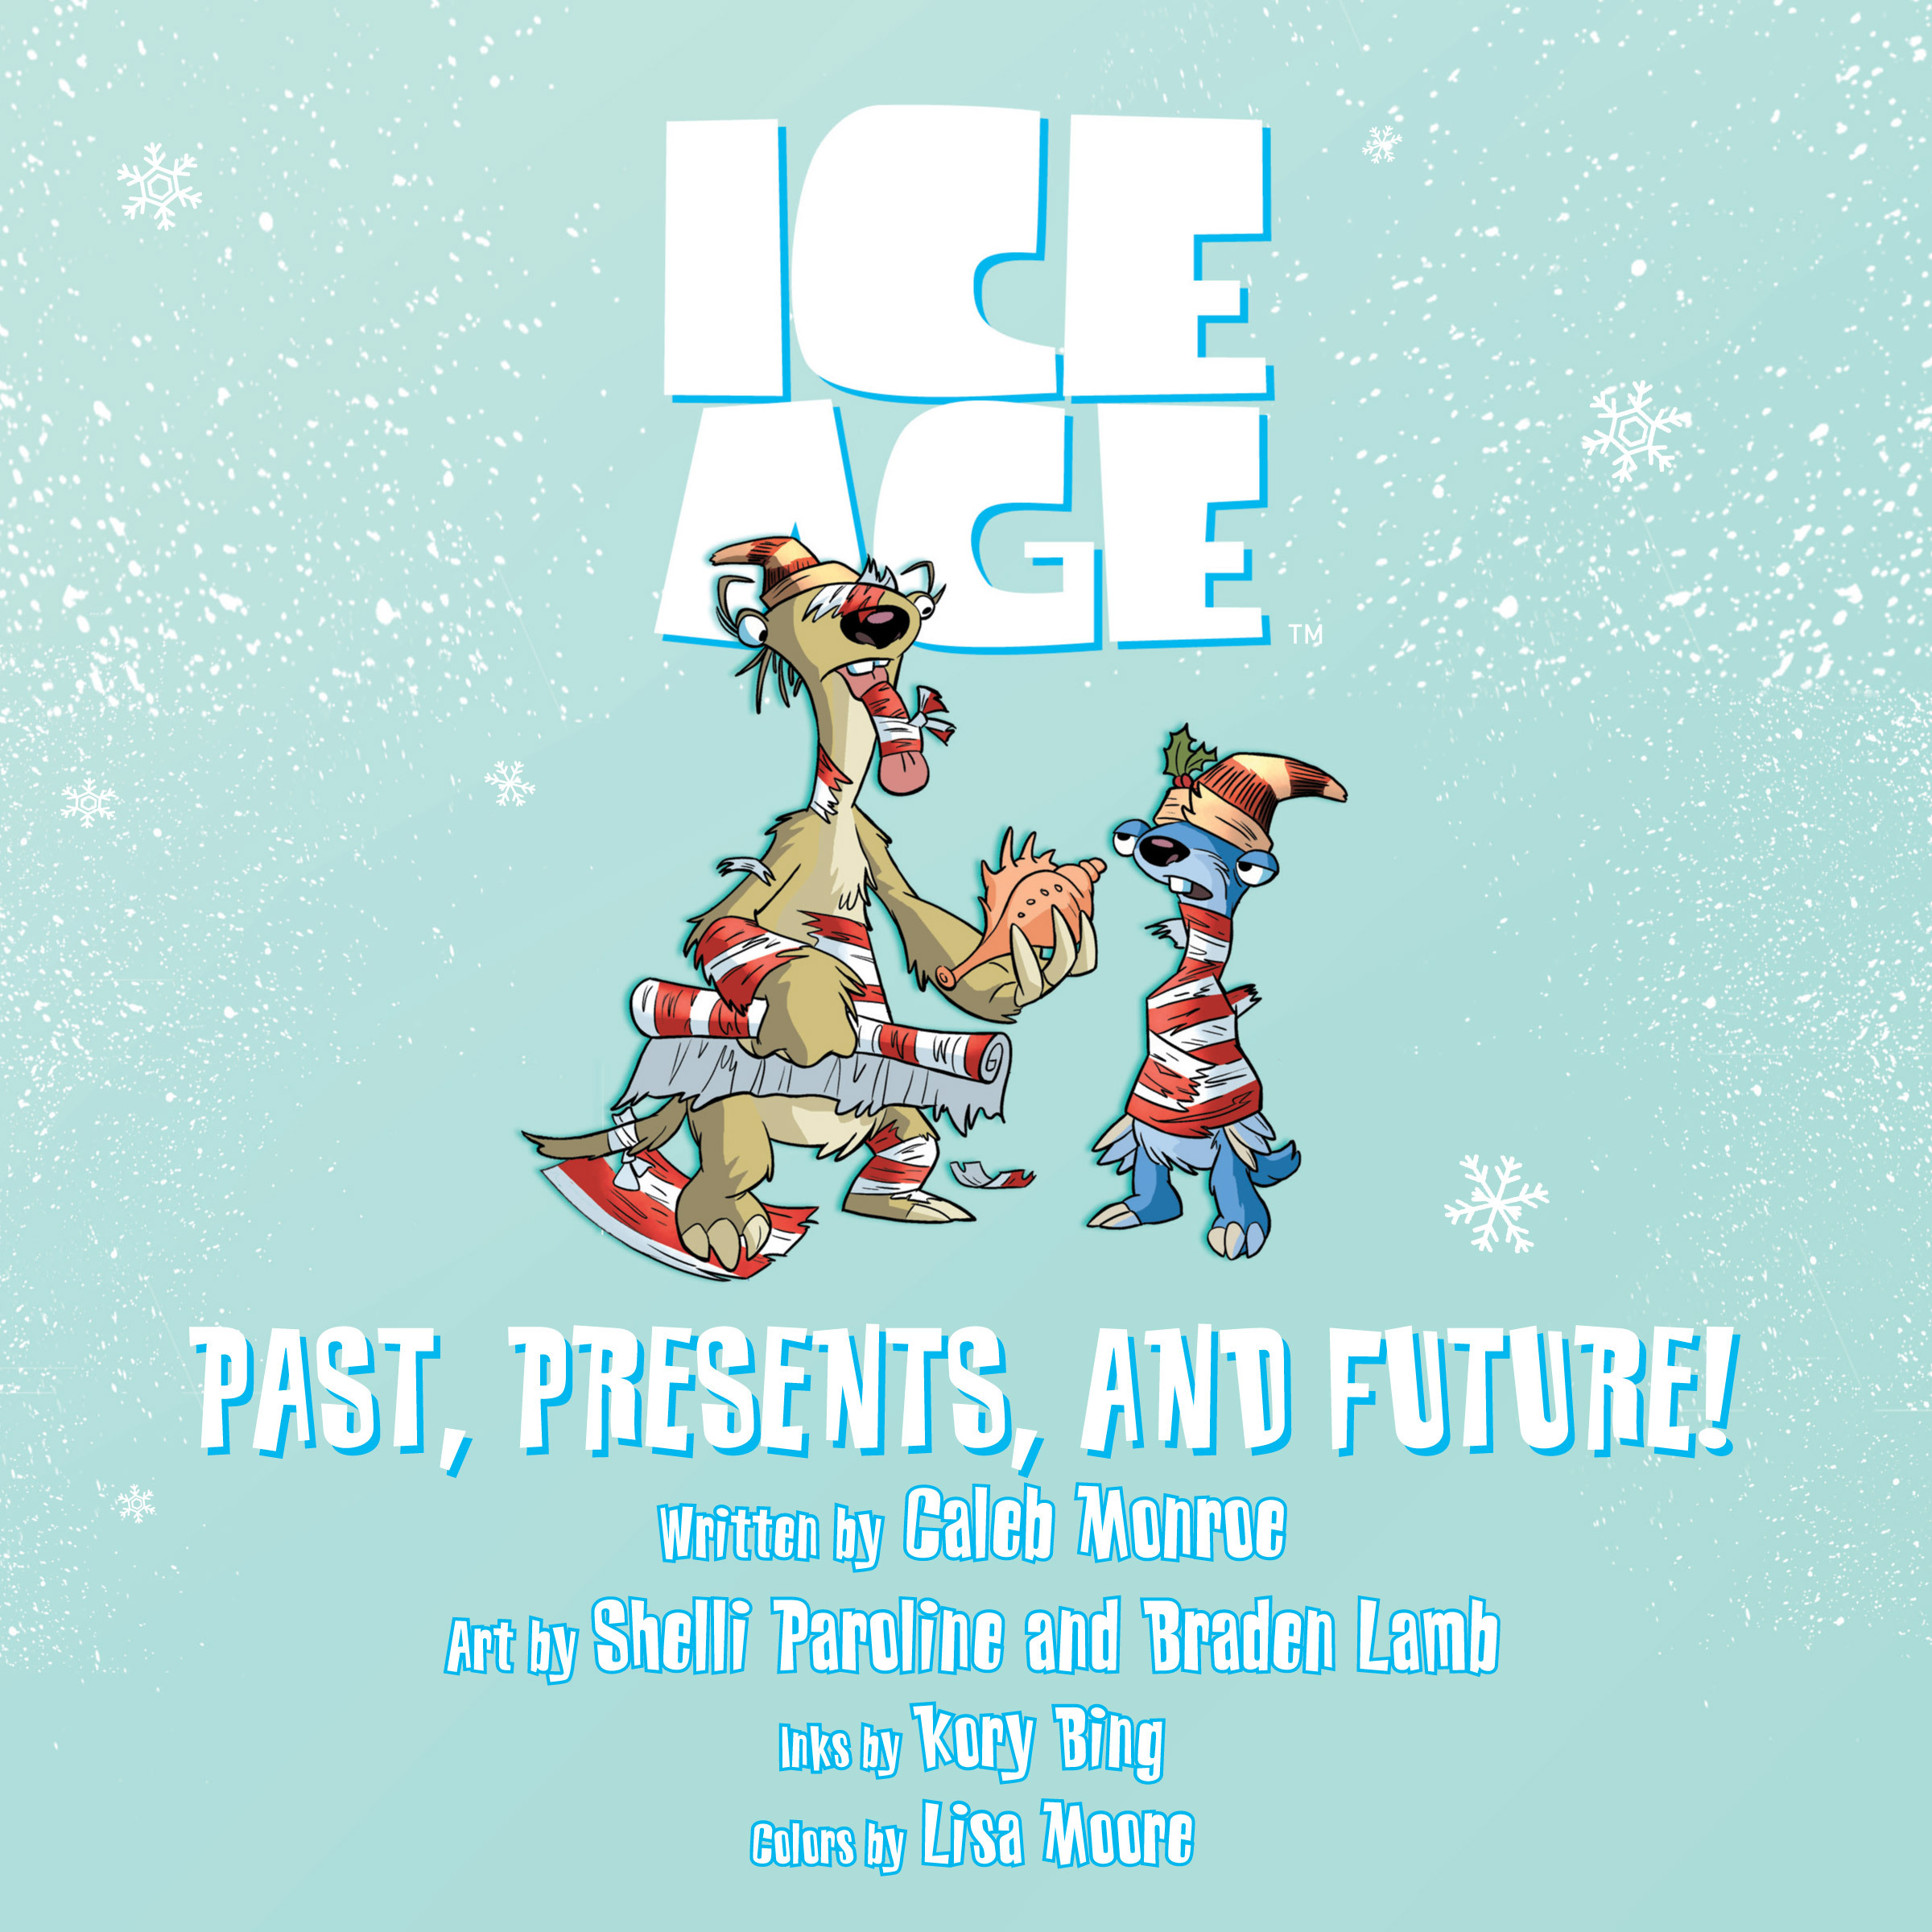 Read online Ice Age: Past, Presents, and Future! comic -  Issue # Full - 3